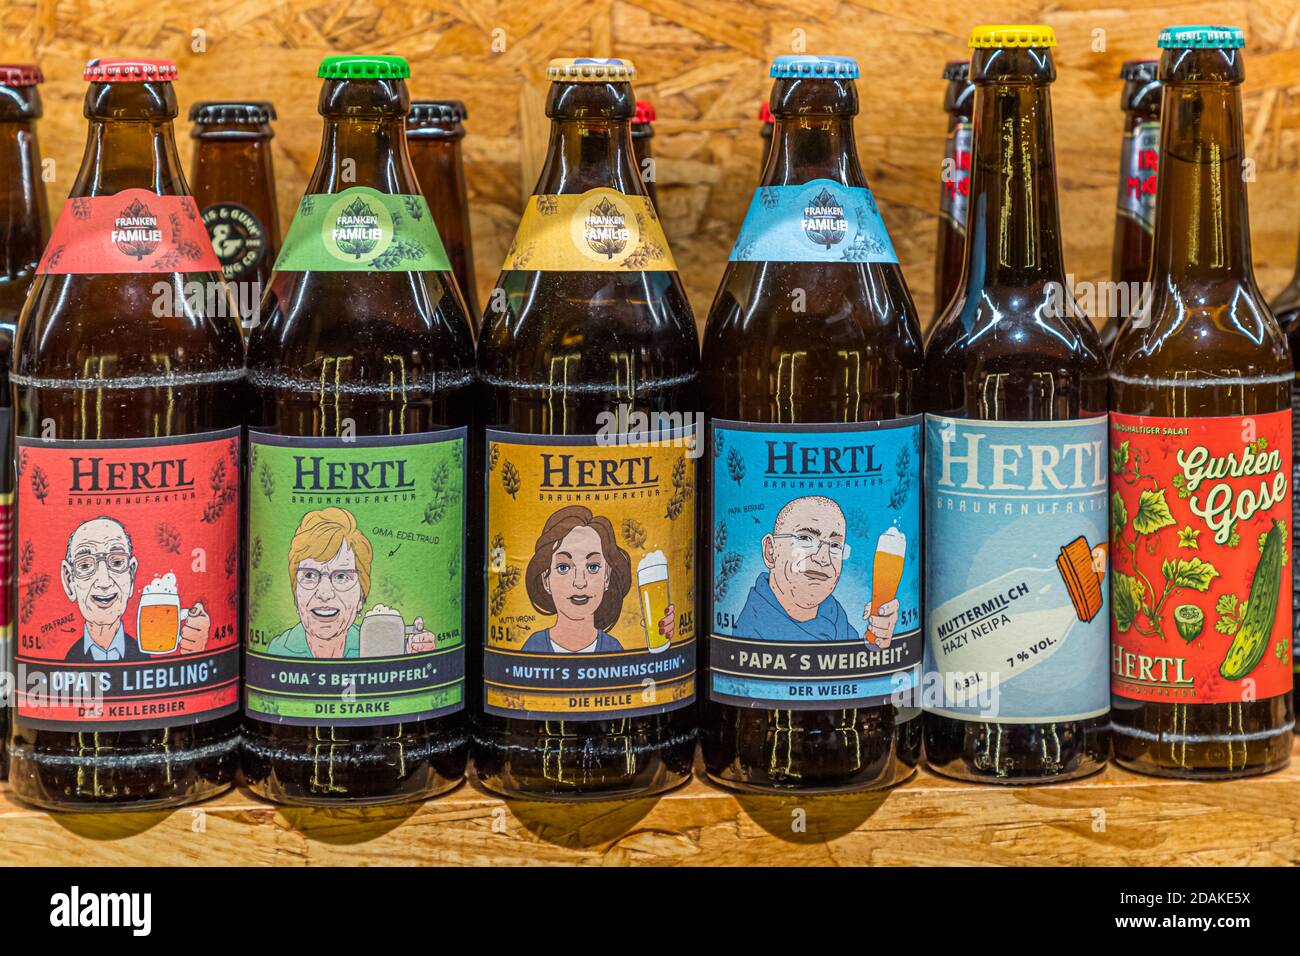 The family is always there: Here is a selection of beers from the Hertl brewery. Hertl Beer Boutique in Bamberg, Germany Stock Photo